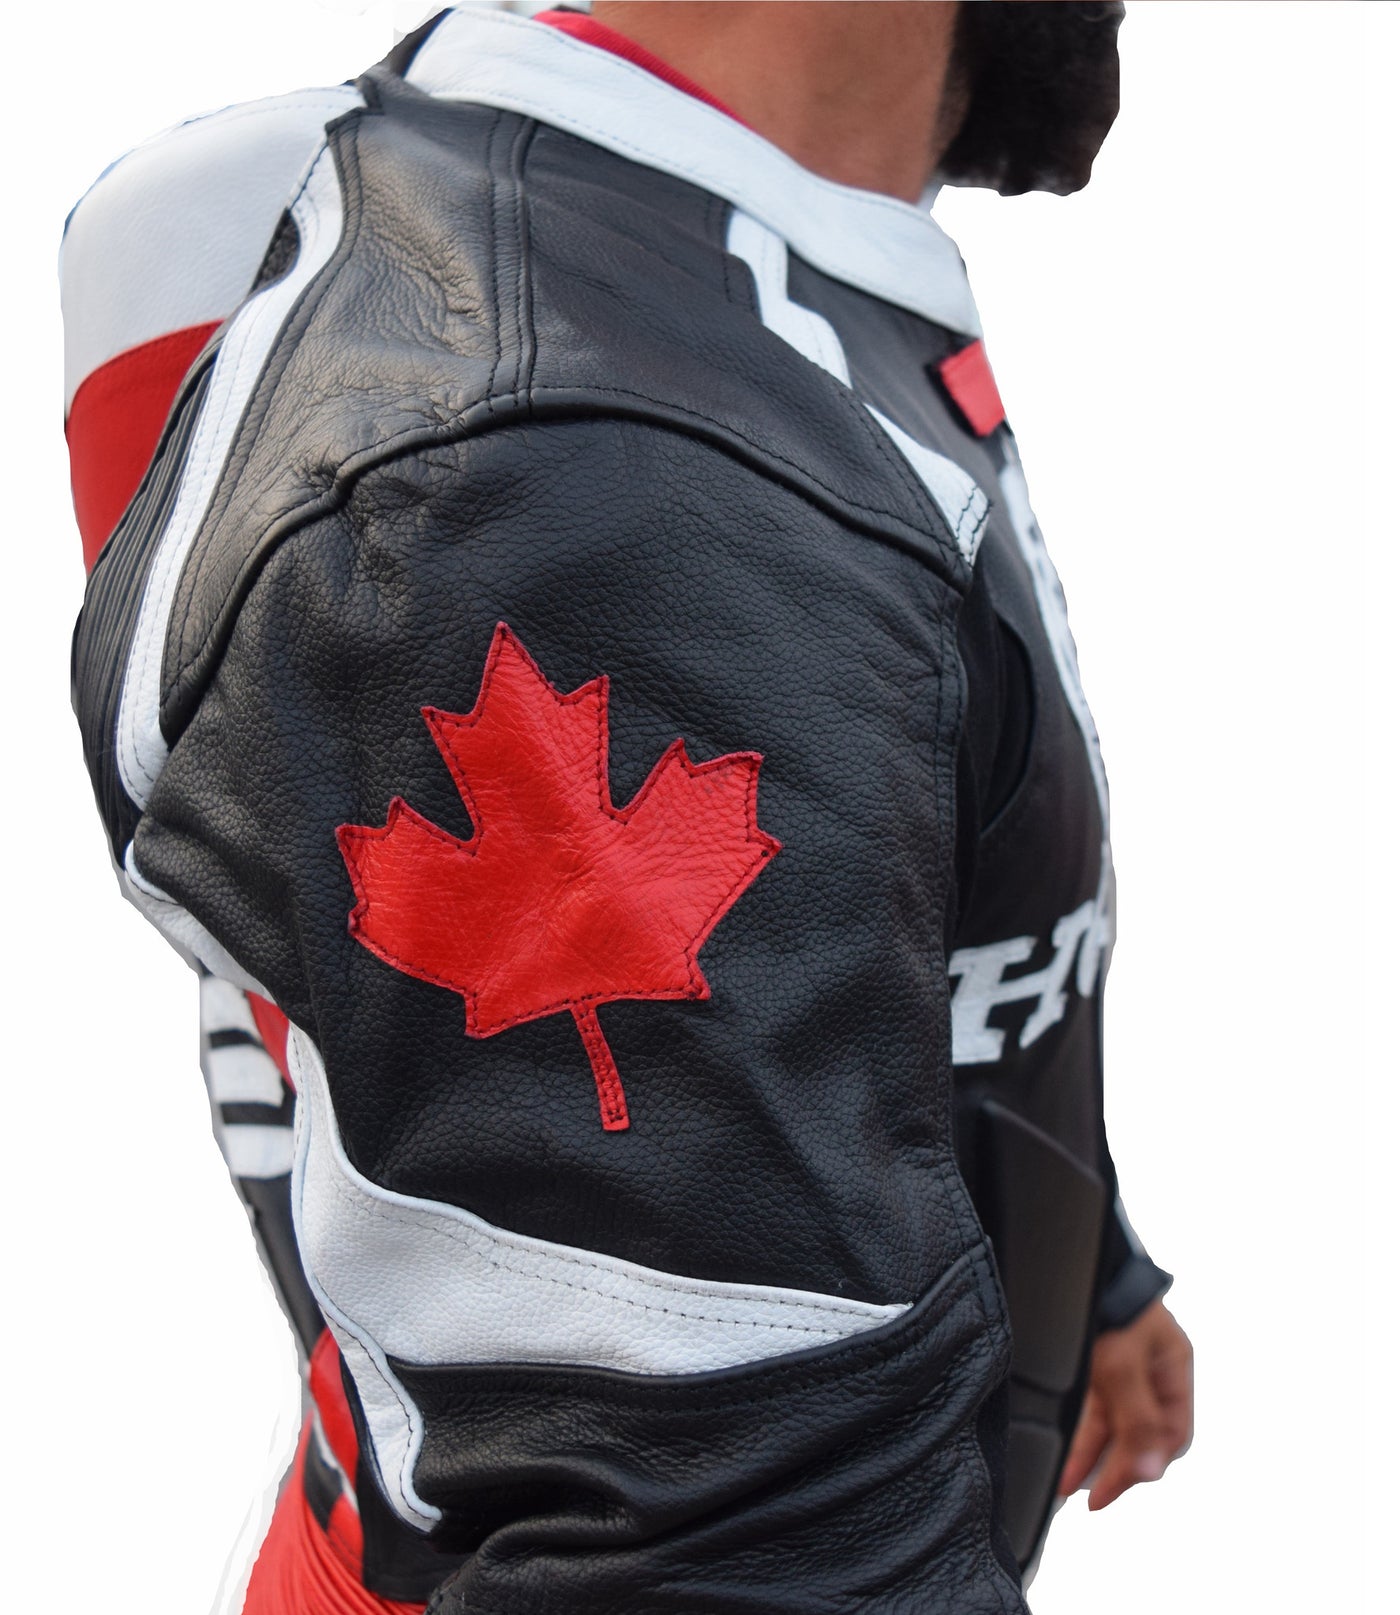 Canadian Safe and Waterproof Honda leather suit 